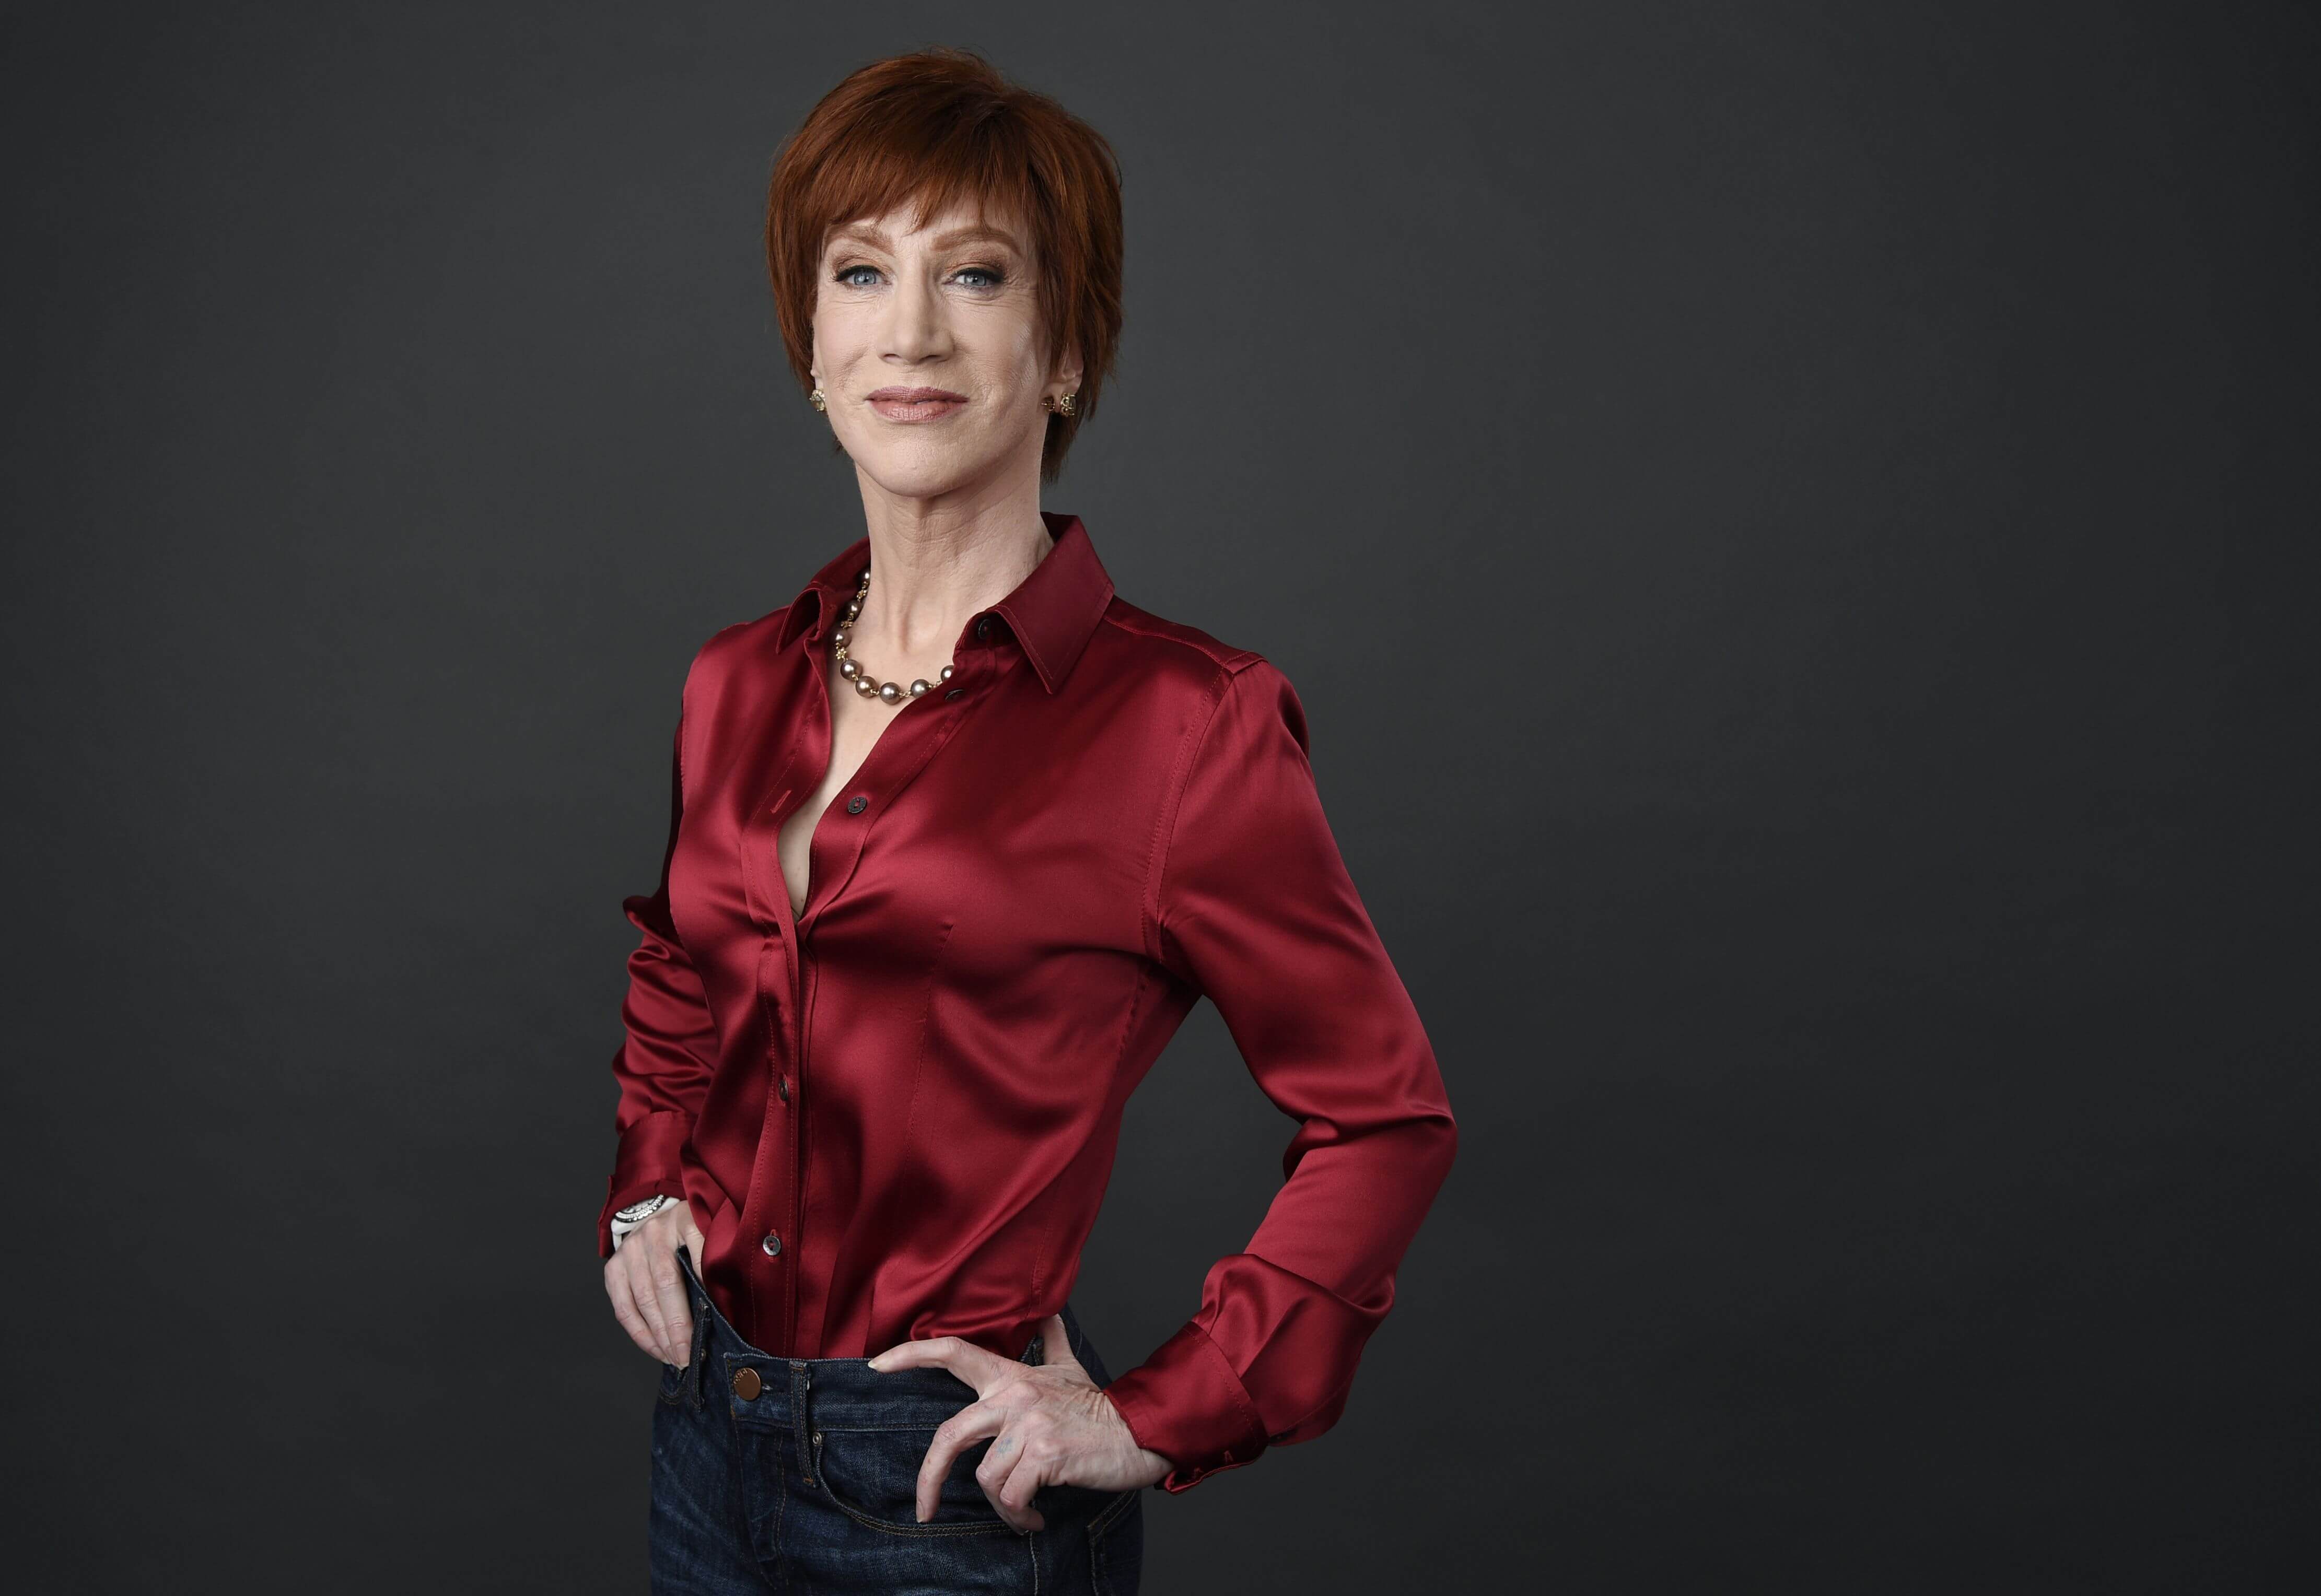 60+ Hot Pictures Of Kathy Griffin Are Just Heavenly To Watch | Best Of Comic Books